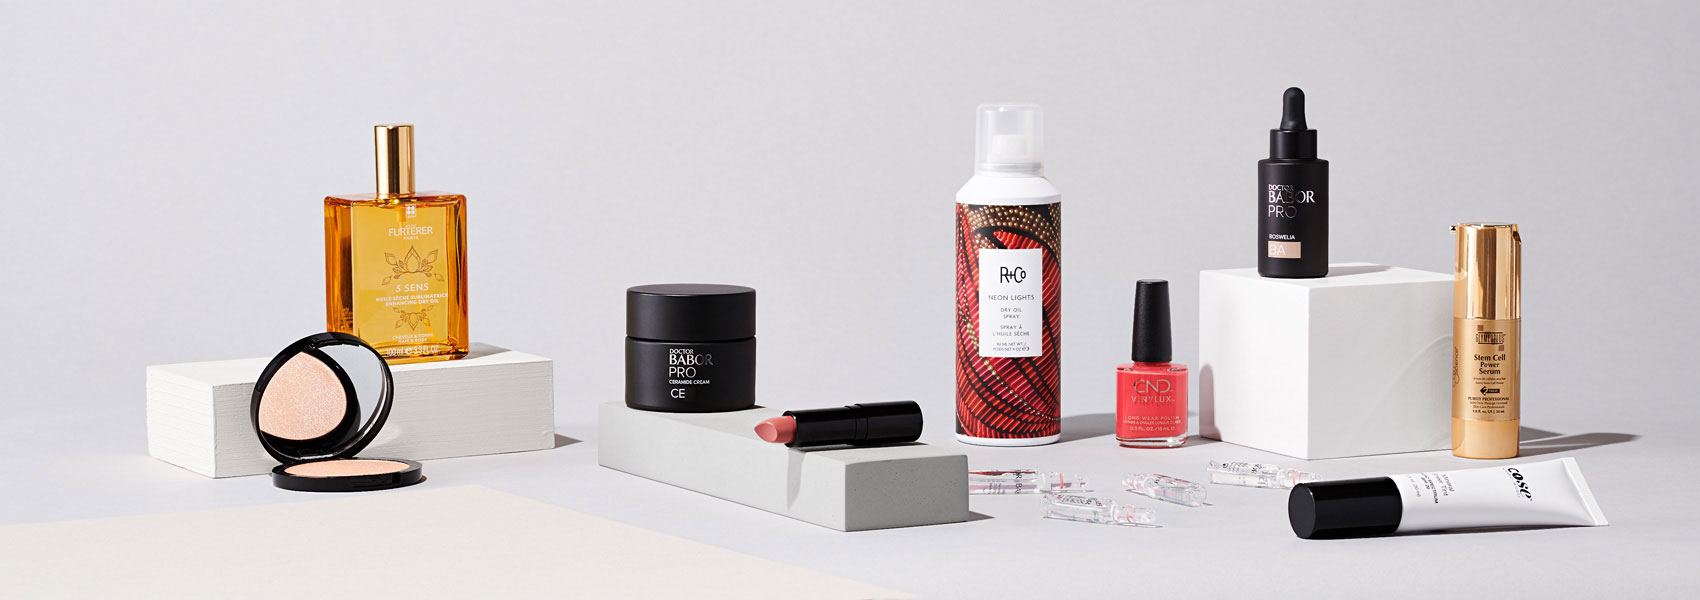 Selection of ten beauty products displayed cleanly on bright, neutral set